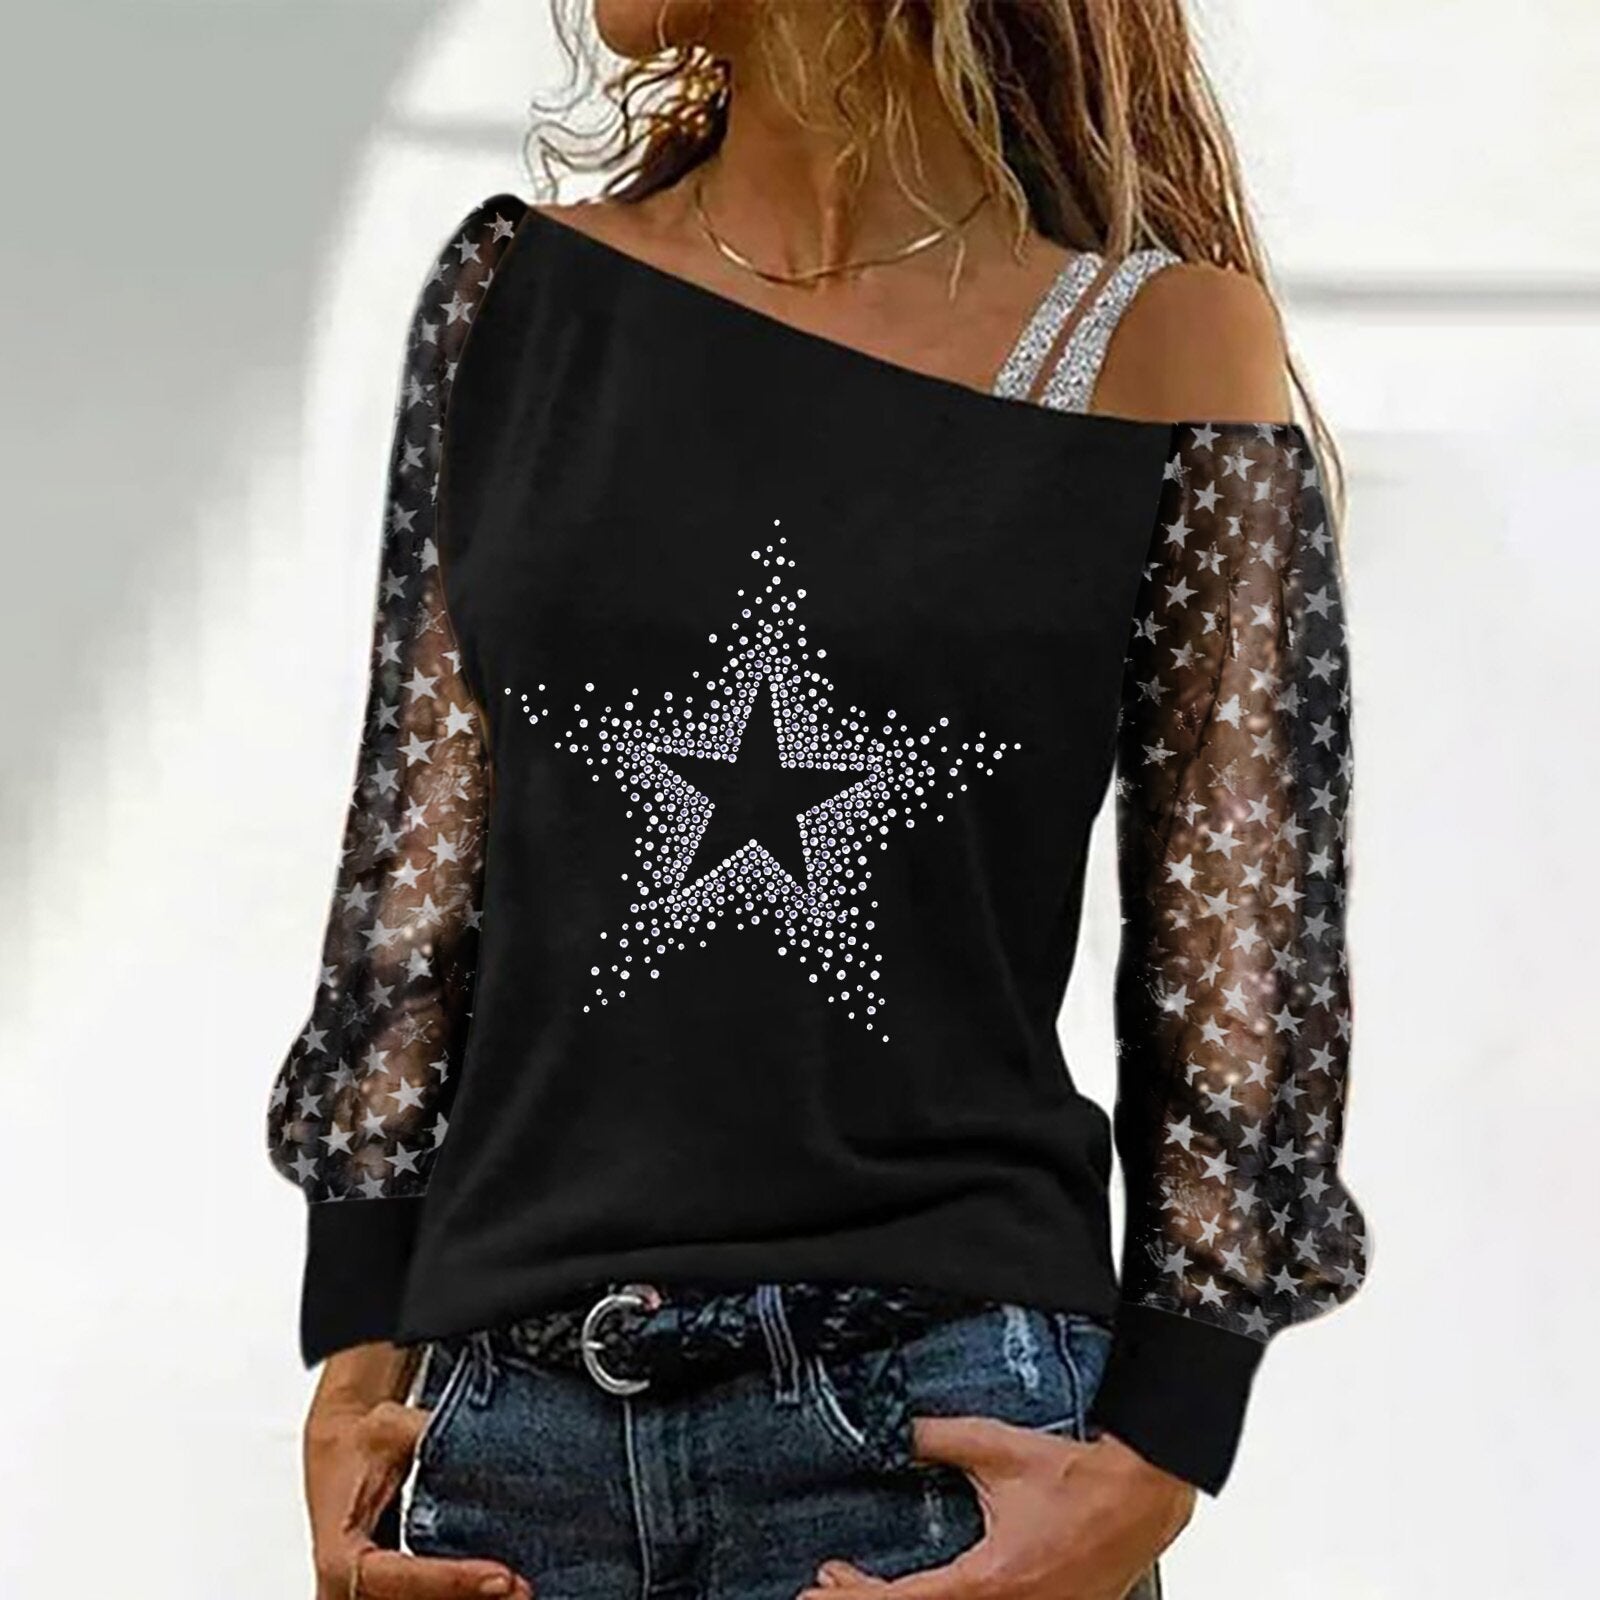 One off shoulder chic long sleeve black printed T-shirts